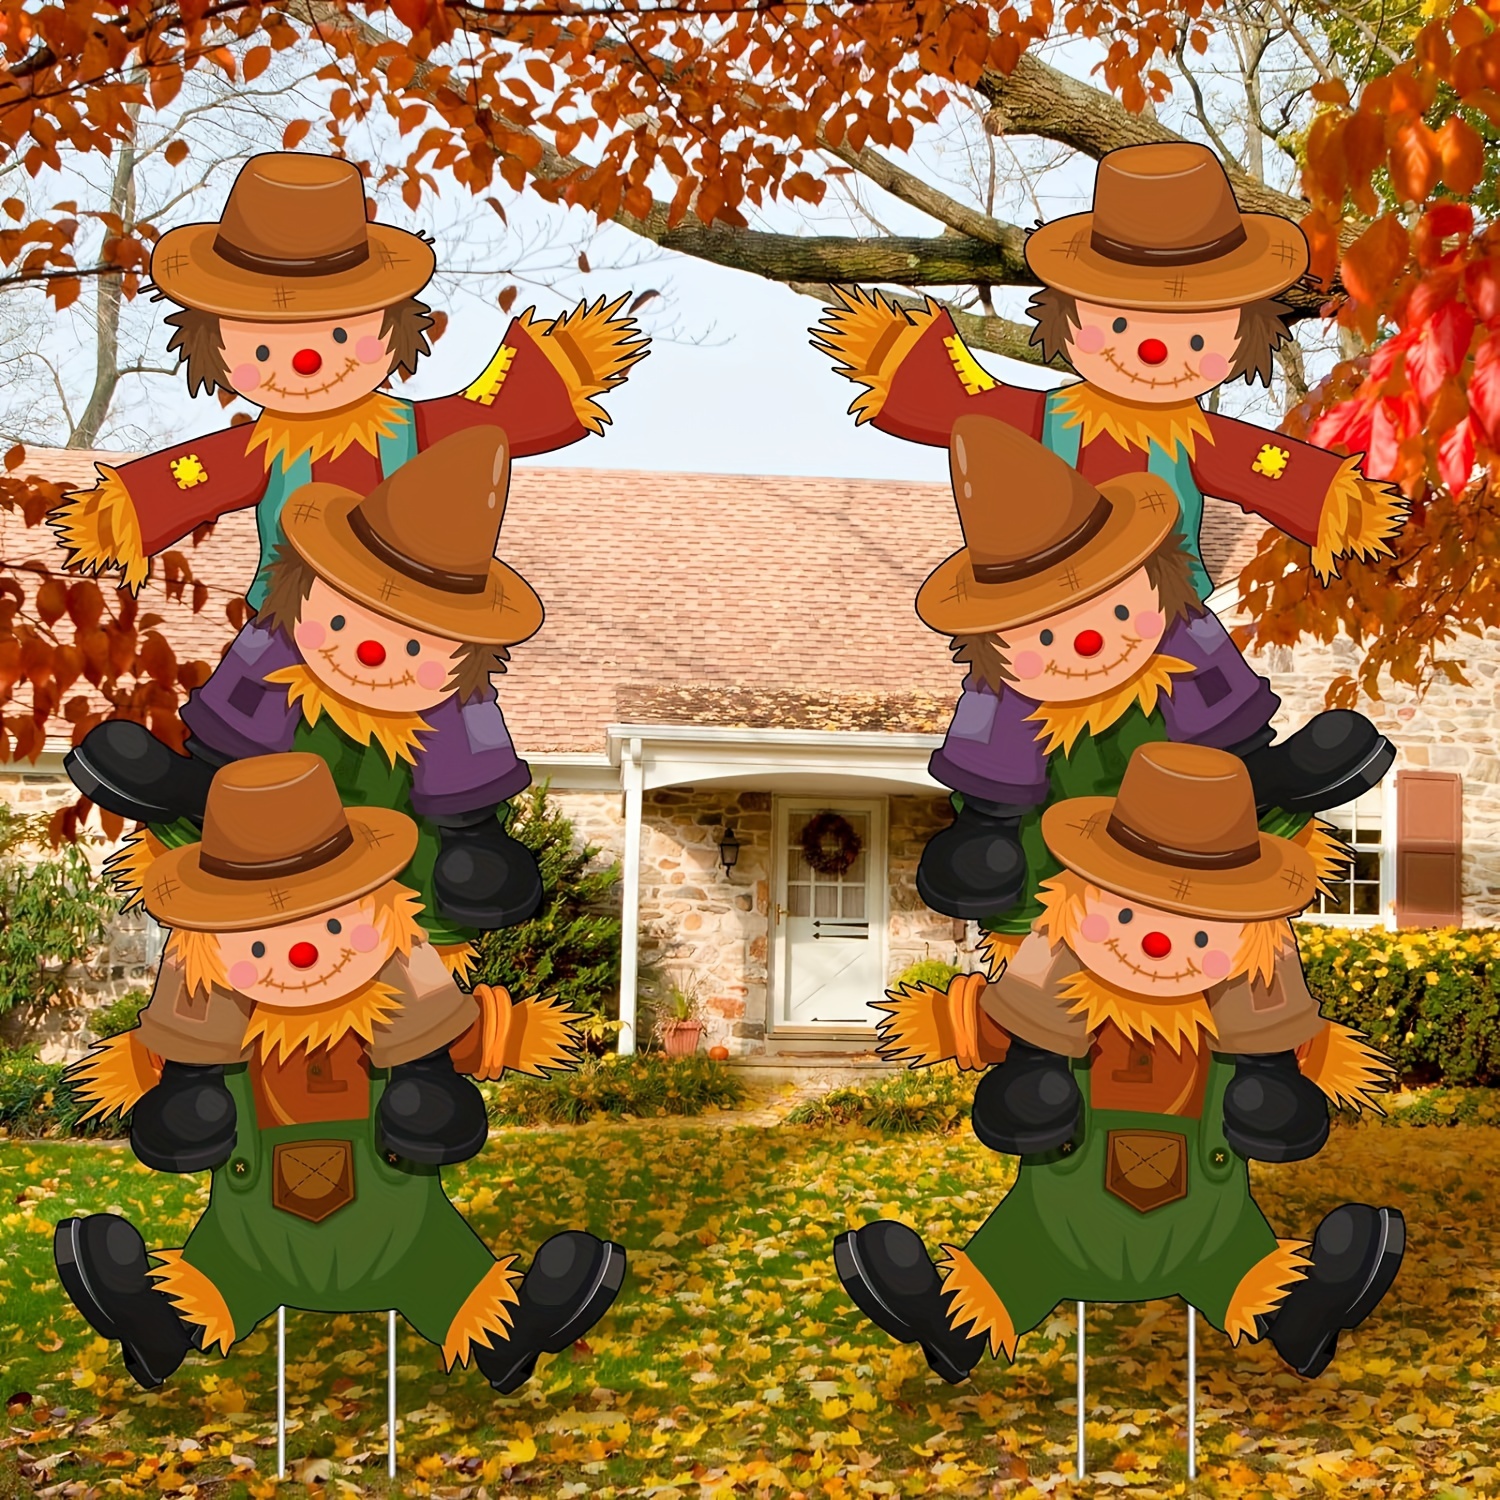 

Set Of 2 Yard Signs With Stakes - 39 Inch Tall Outdoor Fall Decorations, Waterproof Plastic Thanksgiving Lawn Stakes For Garden, Patio & Party Autumn Decor, No Electricity Needed